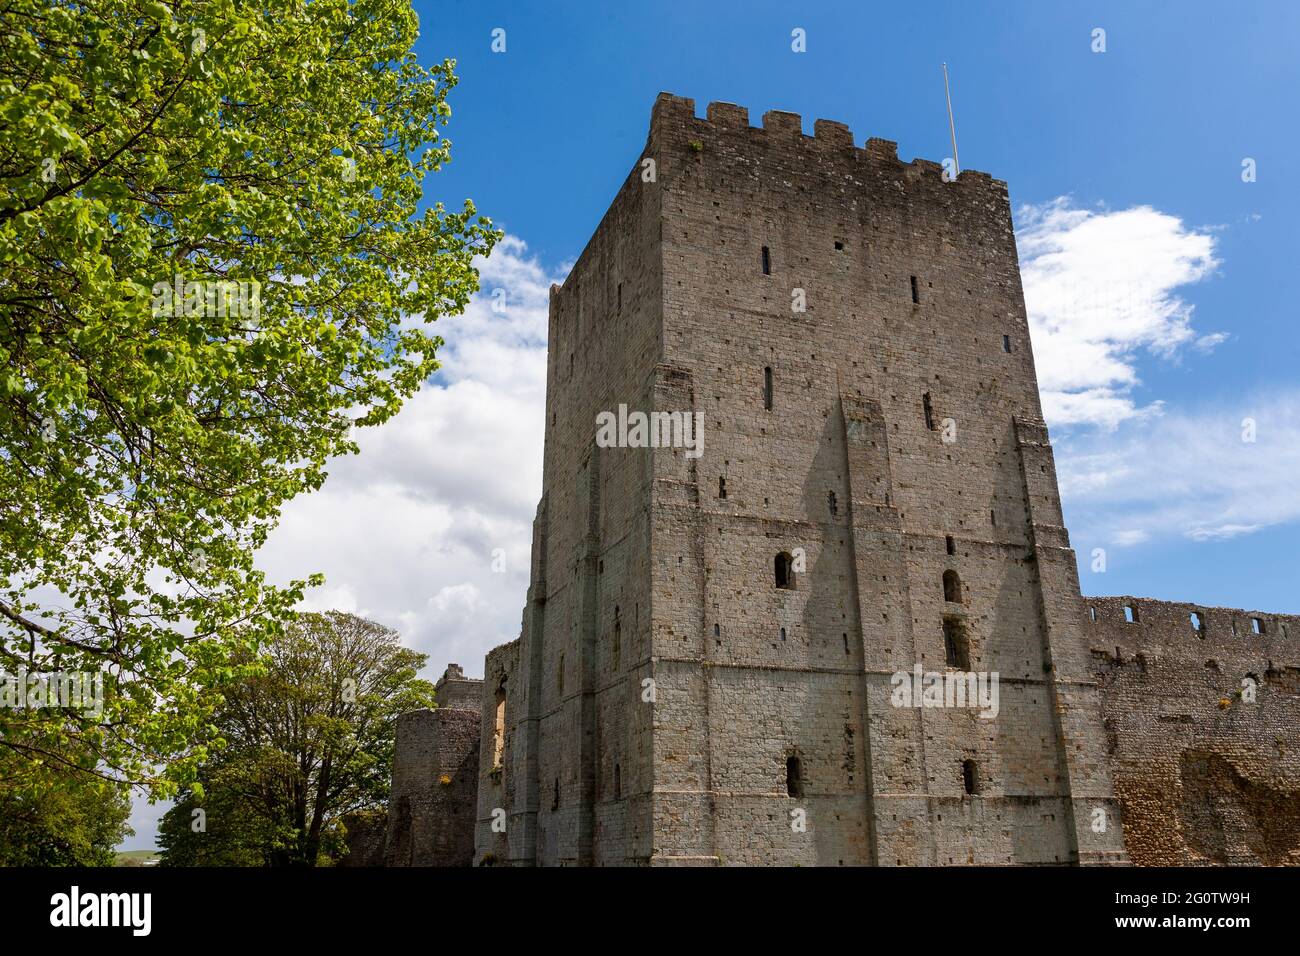 The Norman Keep of Portchester Castle, Portchester, Hampshire, UK Stock Photo